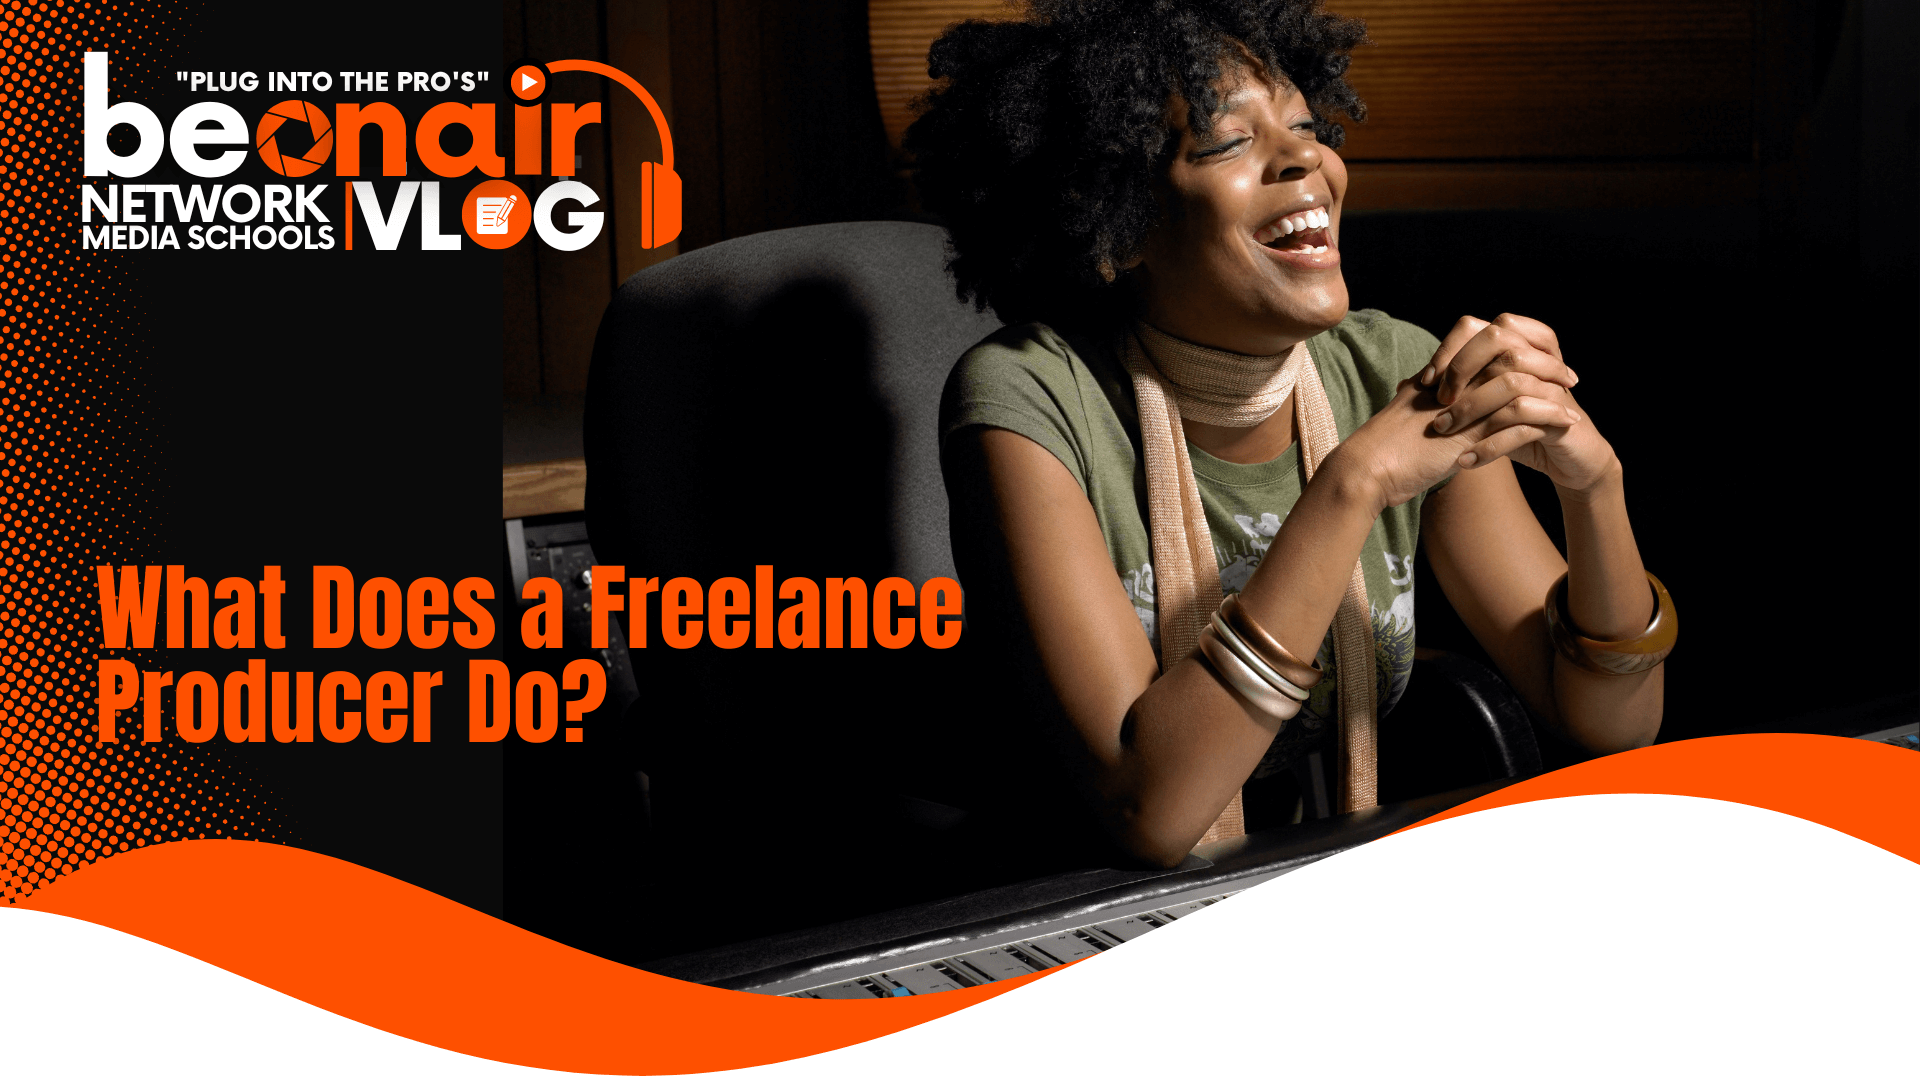 What Does a Freelance Producer Do?